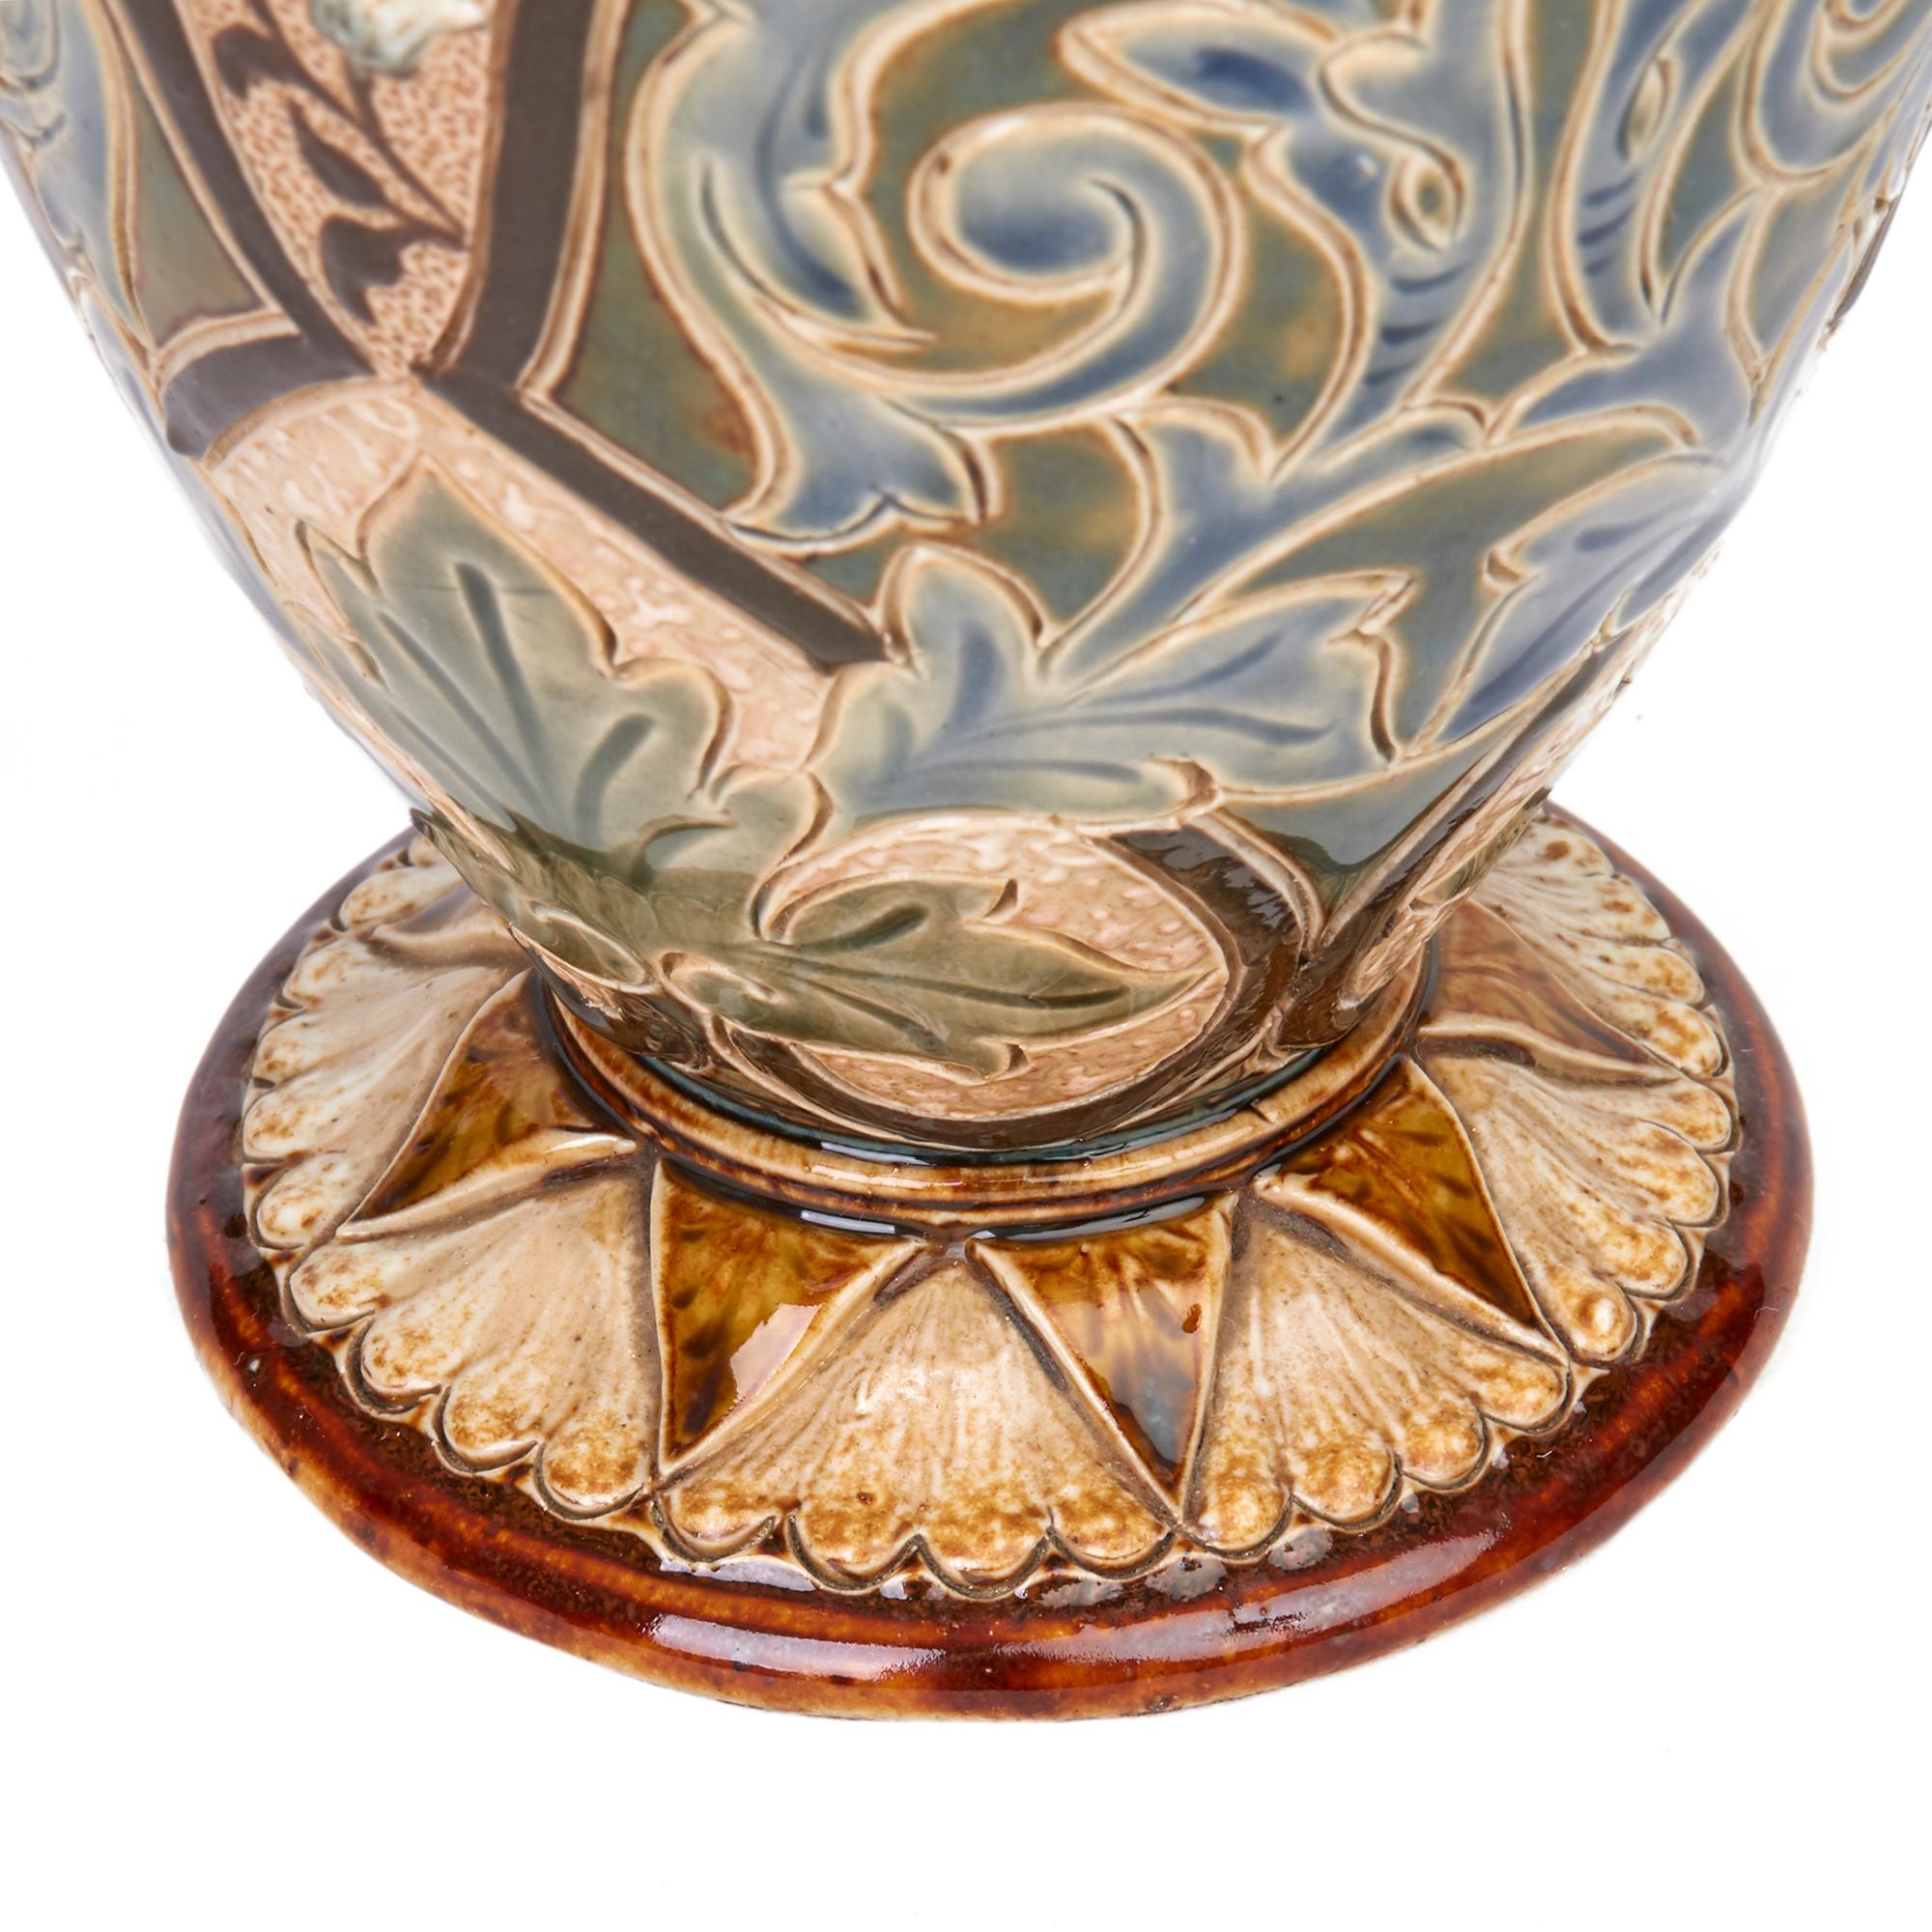 Doulton Lambeth Pair of Exceptional Art Pottery Vases by Alice Barker, 1883 2